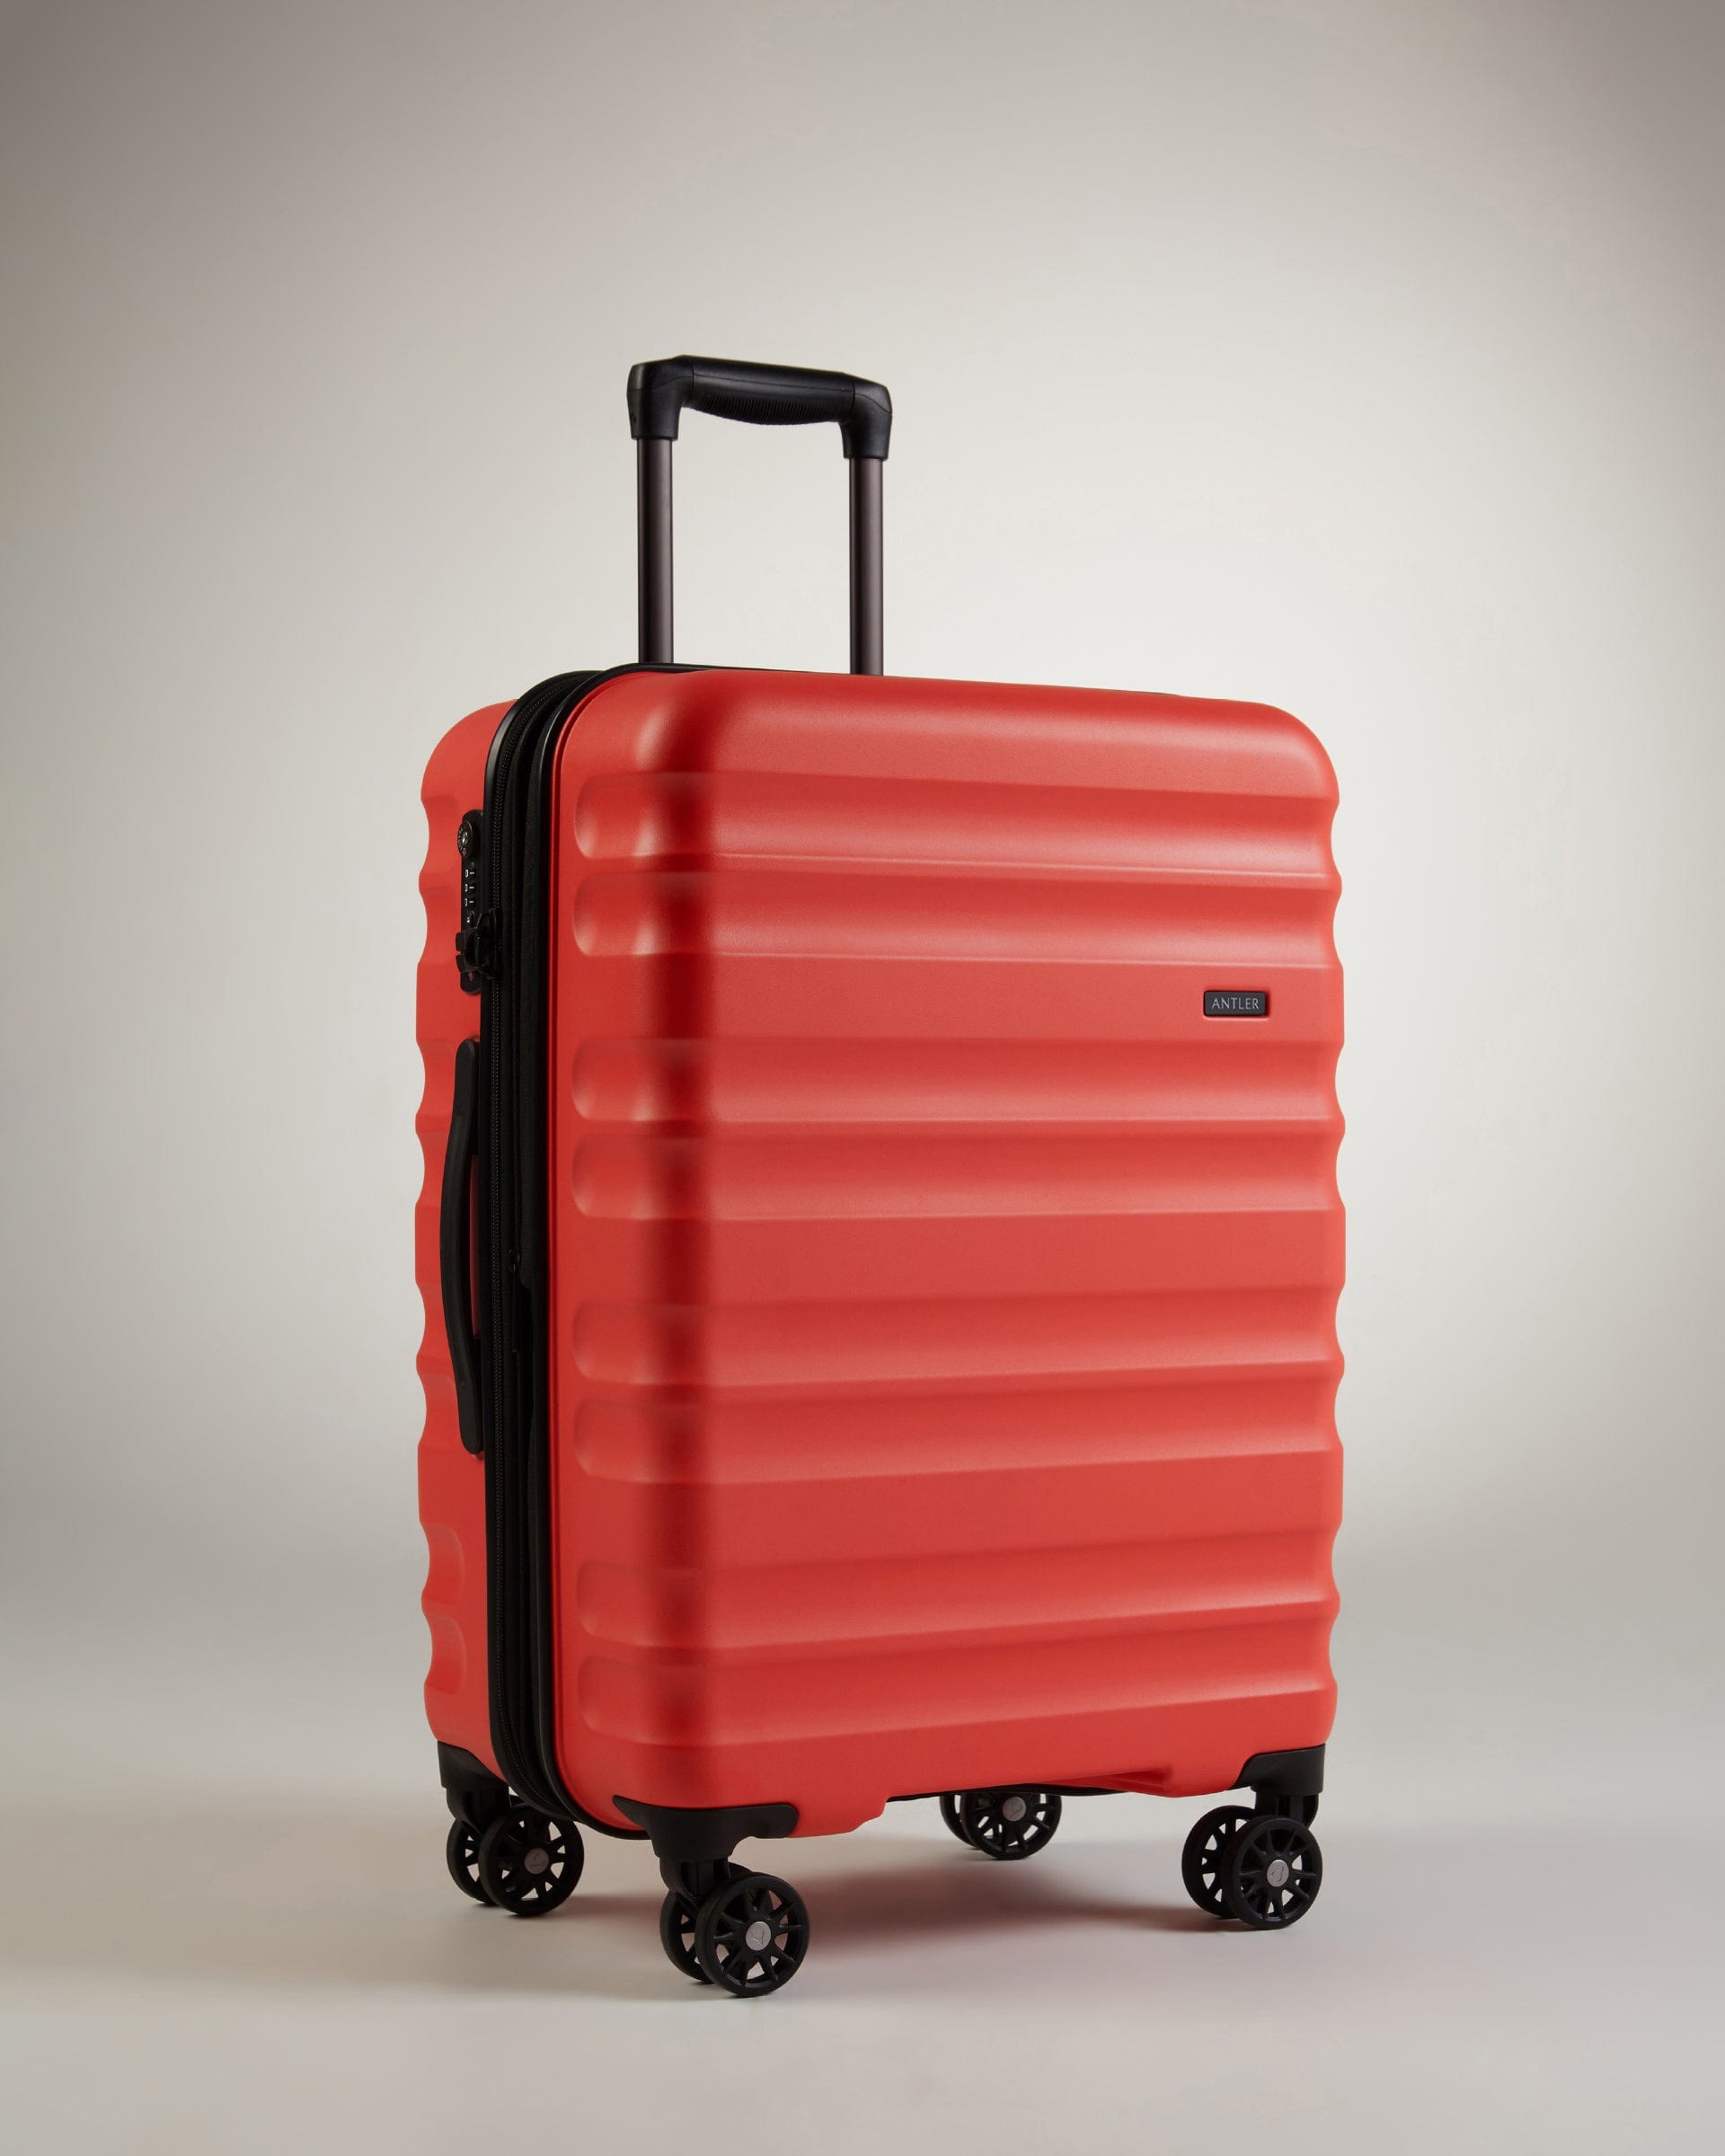 View Antler Clifton Medium Suitcase In Coral Size 30 x 45 x 67 cm information